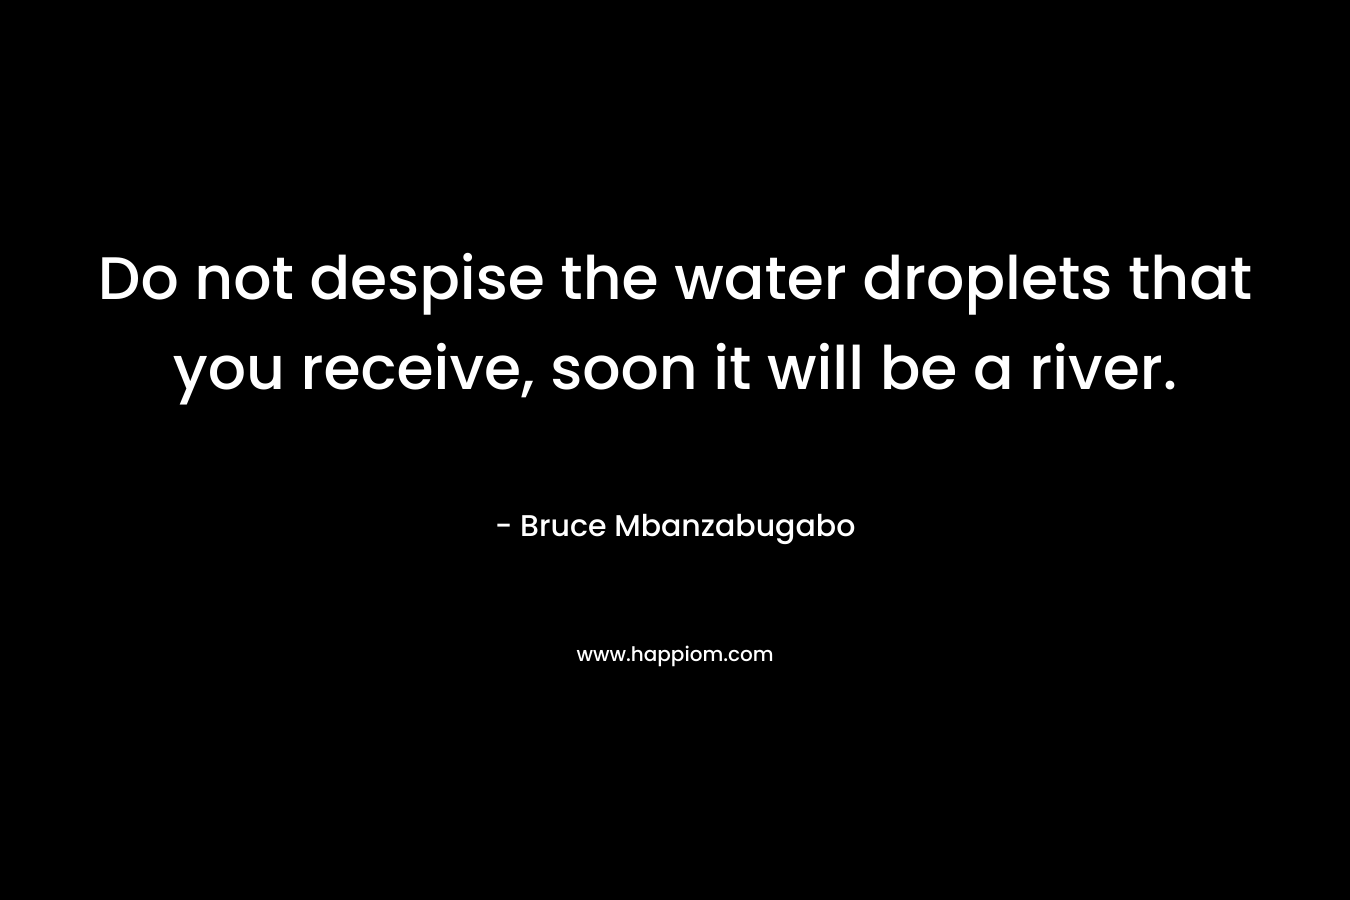 Do not despise the water droplets that you receive, soon it will be a river.